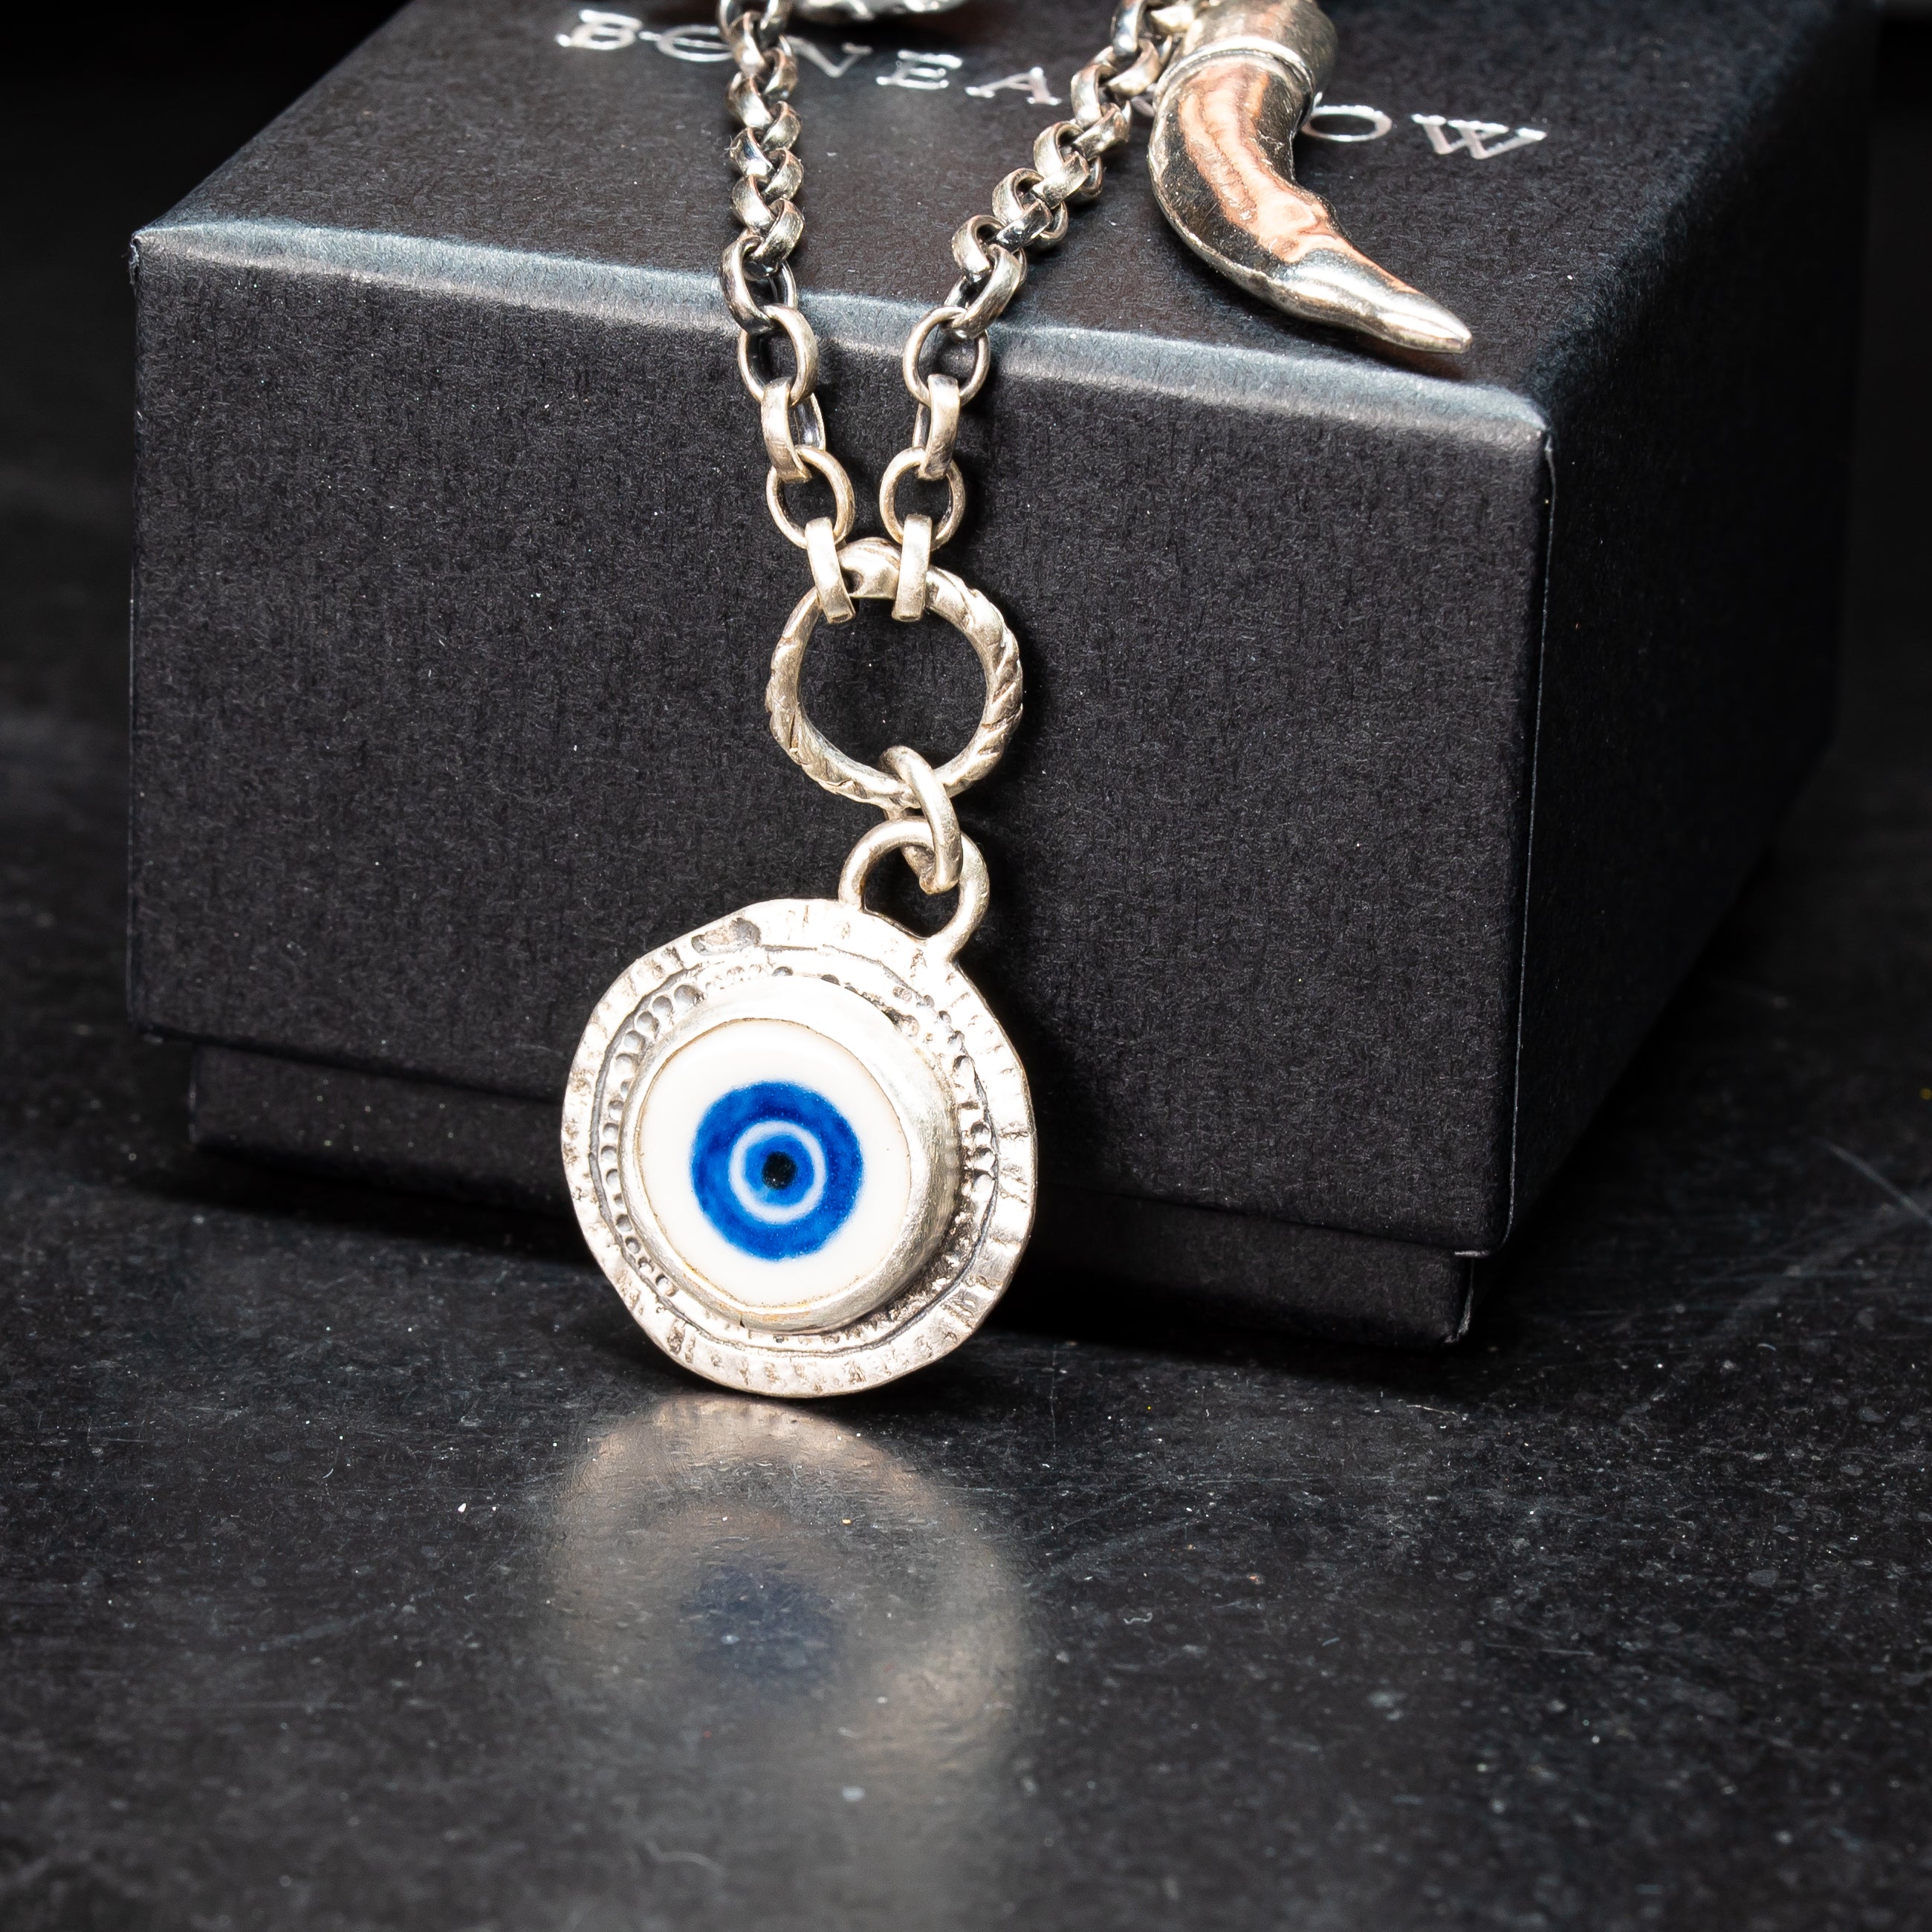 porcelain handprinted evil eye motif set in a sterling silver handmade coin pendant on handmade charm enclave draped over a jewellery box on a black background